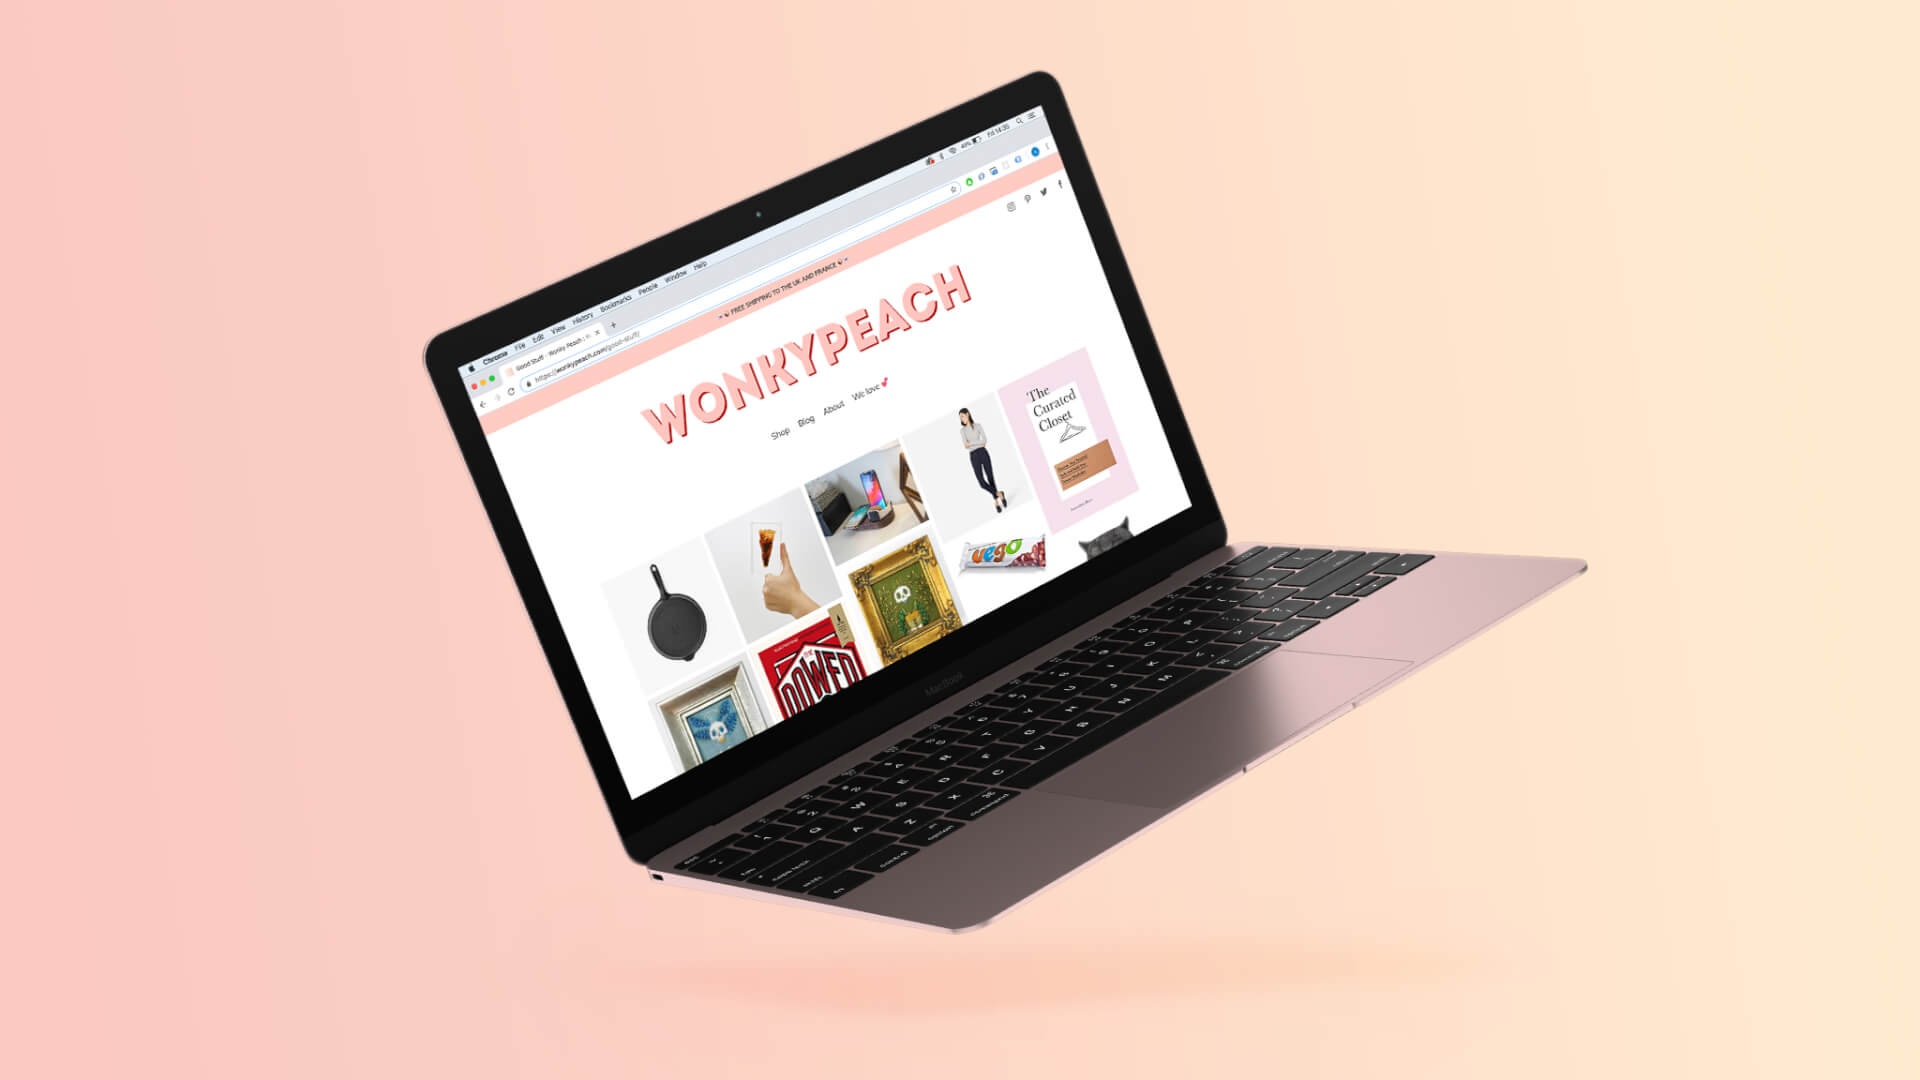 An image showing how the new Wonkypeach website looks on a Macbook Pro. The page it is showing is the 'We Love' page, that has a grid of different images linking to products that Wonkypeach loves.